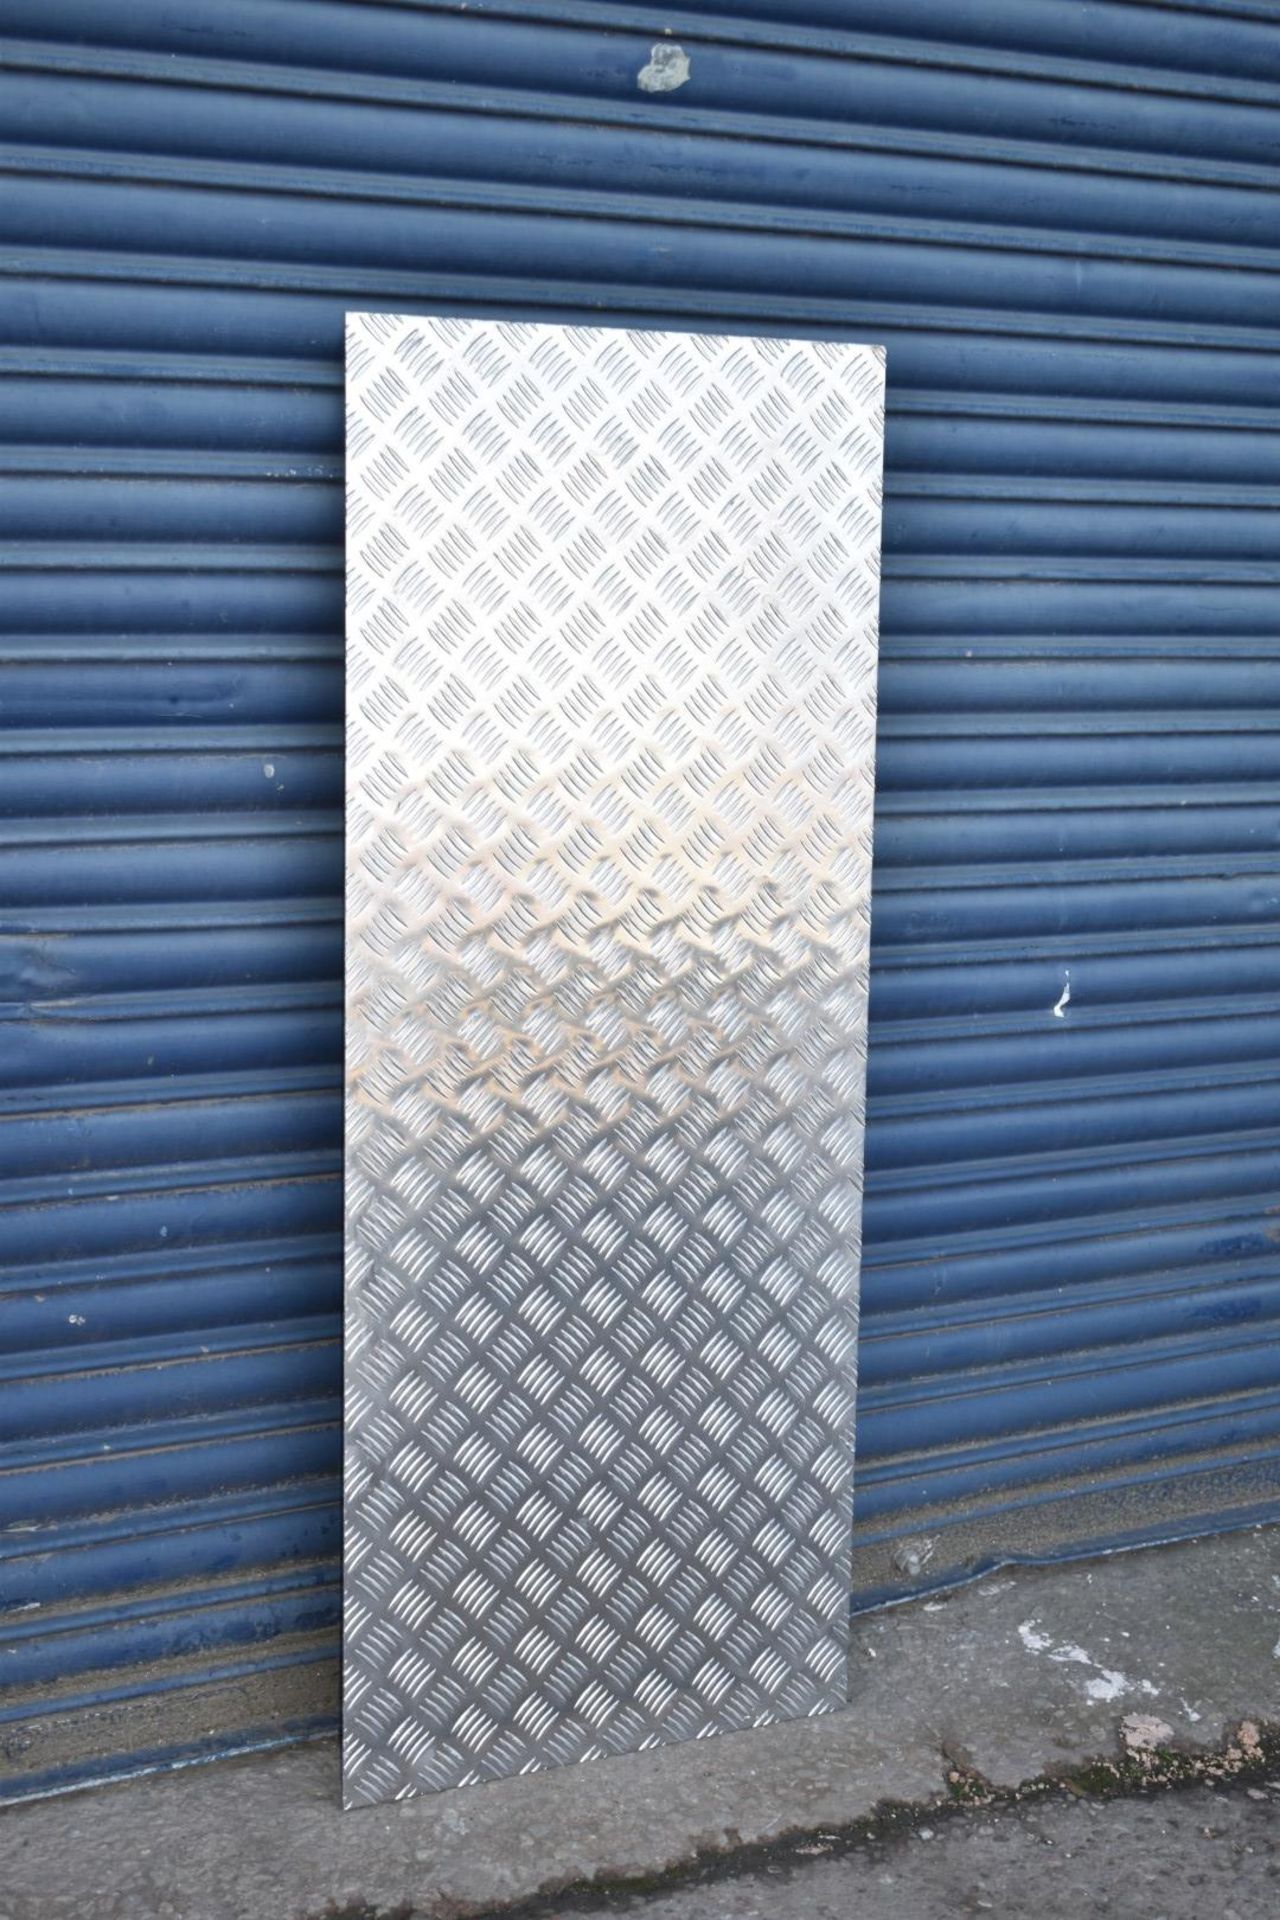 1 x Aluminium Tread Checker Plate - Size 125 x 50.5 x 0.3 cms - None Slip Floor Plate Suitable For - Image 2 of 4